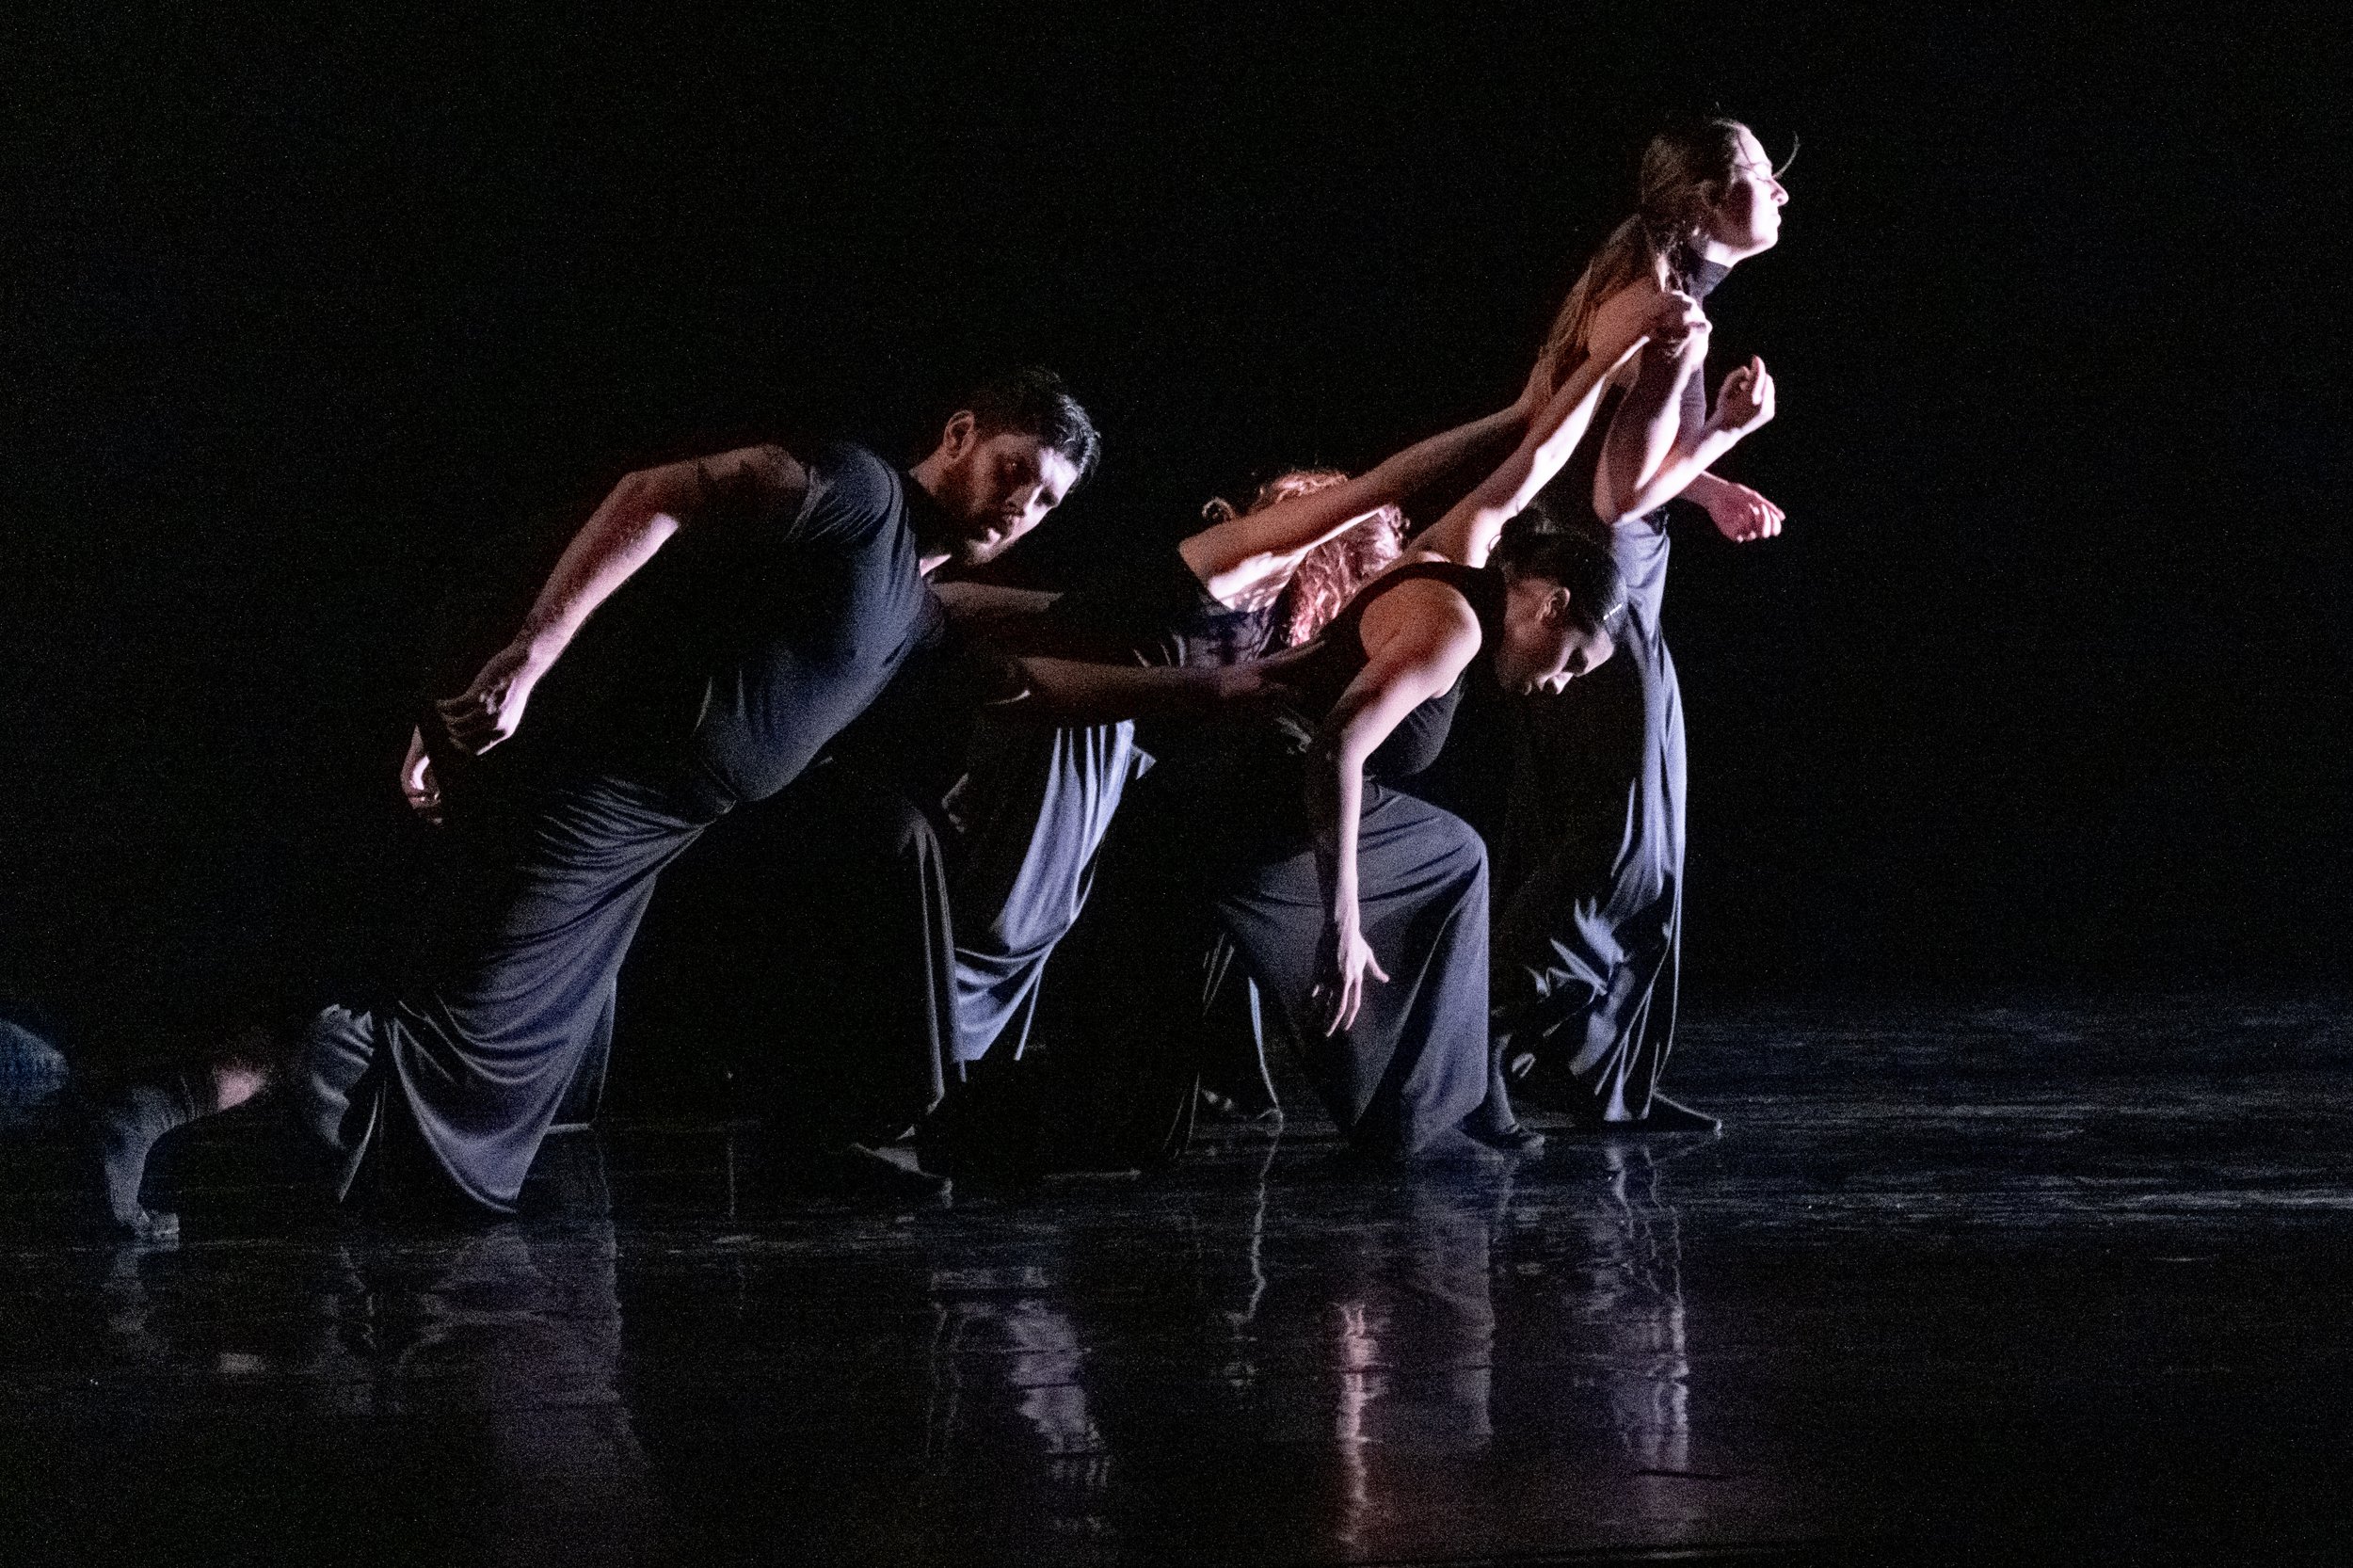  (From L to R) Dancers Michael Hamilton, Kate Chandler, Erille Weiss and Marley Gazarants rehearse a piece choreographed by student choreophraher Simon Lathrop for the Santa Monica College Contemporary Dance Performance Synapse at BroadStage in Santa